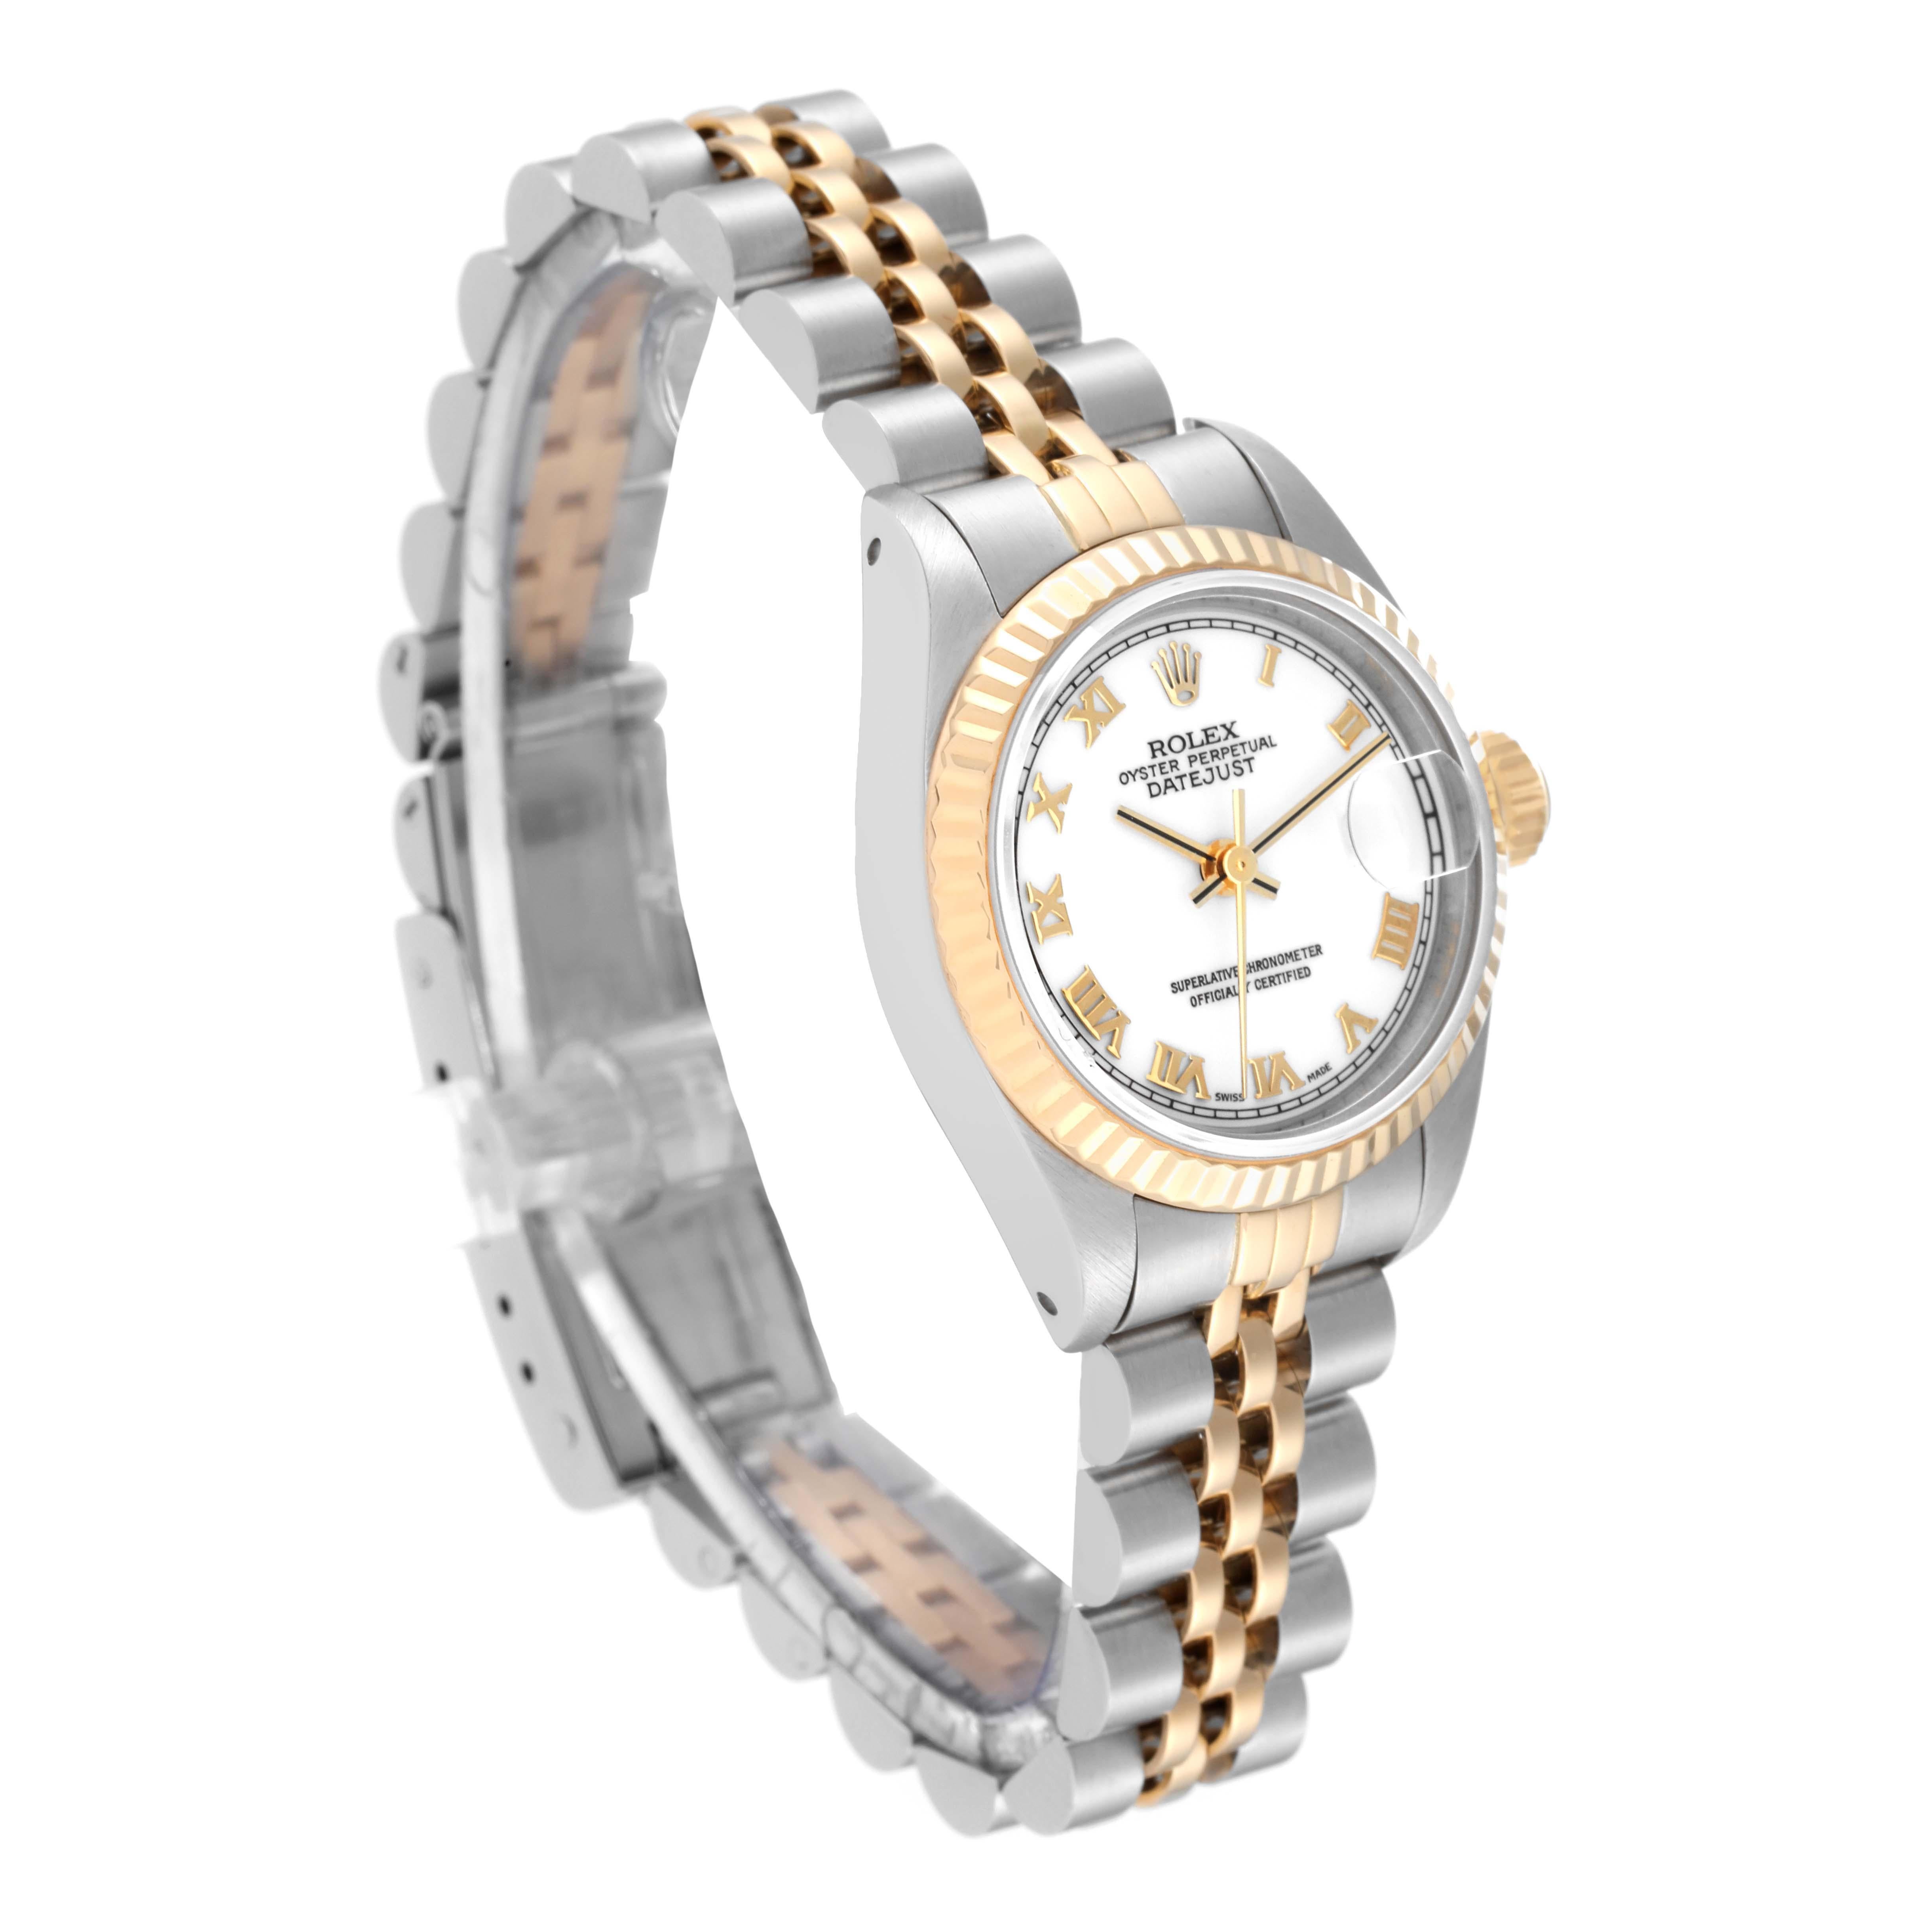 Rolex Datejust White Dial Steel Yellow Gold Ladies Watch 69173 In Excellent Condition For Sale In Atlanta, GA